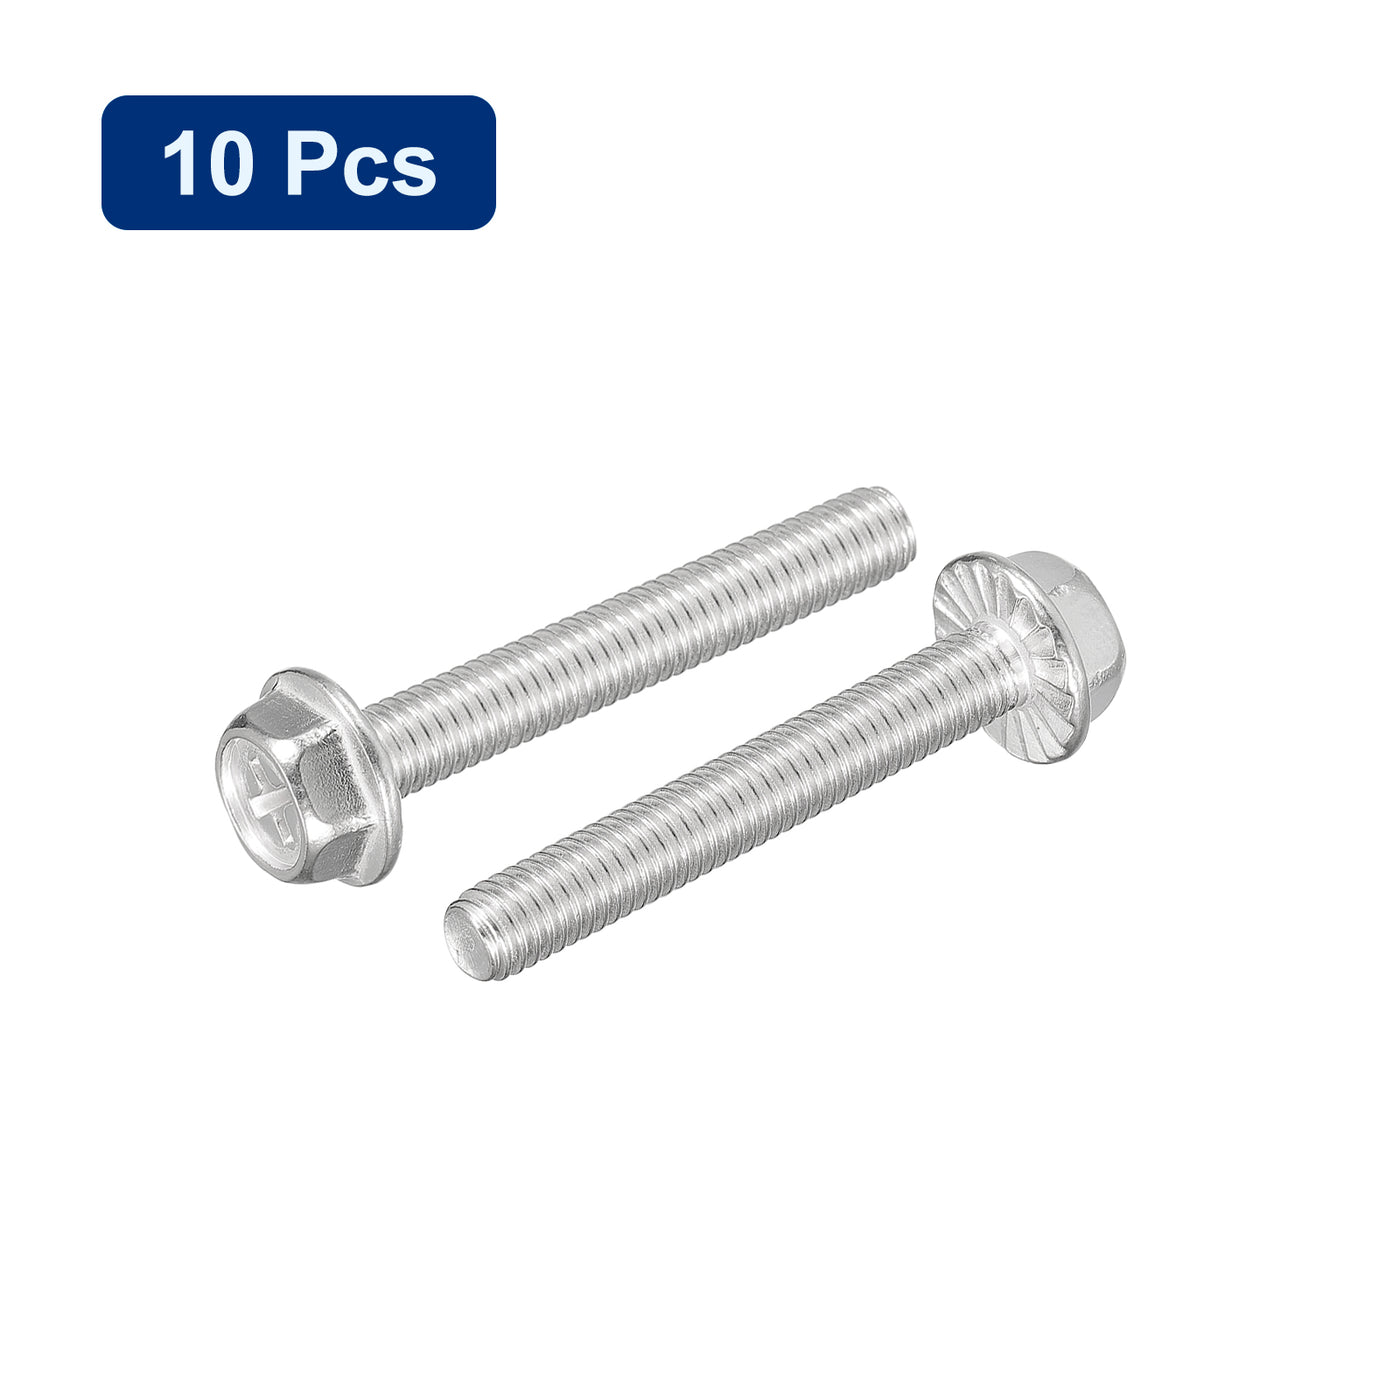 uxcell Uxcell M6x40mm Phillips Hex Head Flange Bolts, 10pcs 304 Stainless Steel Screws